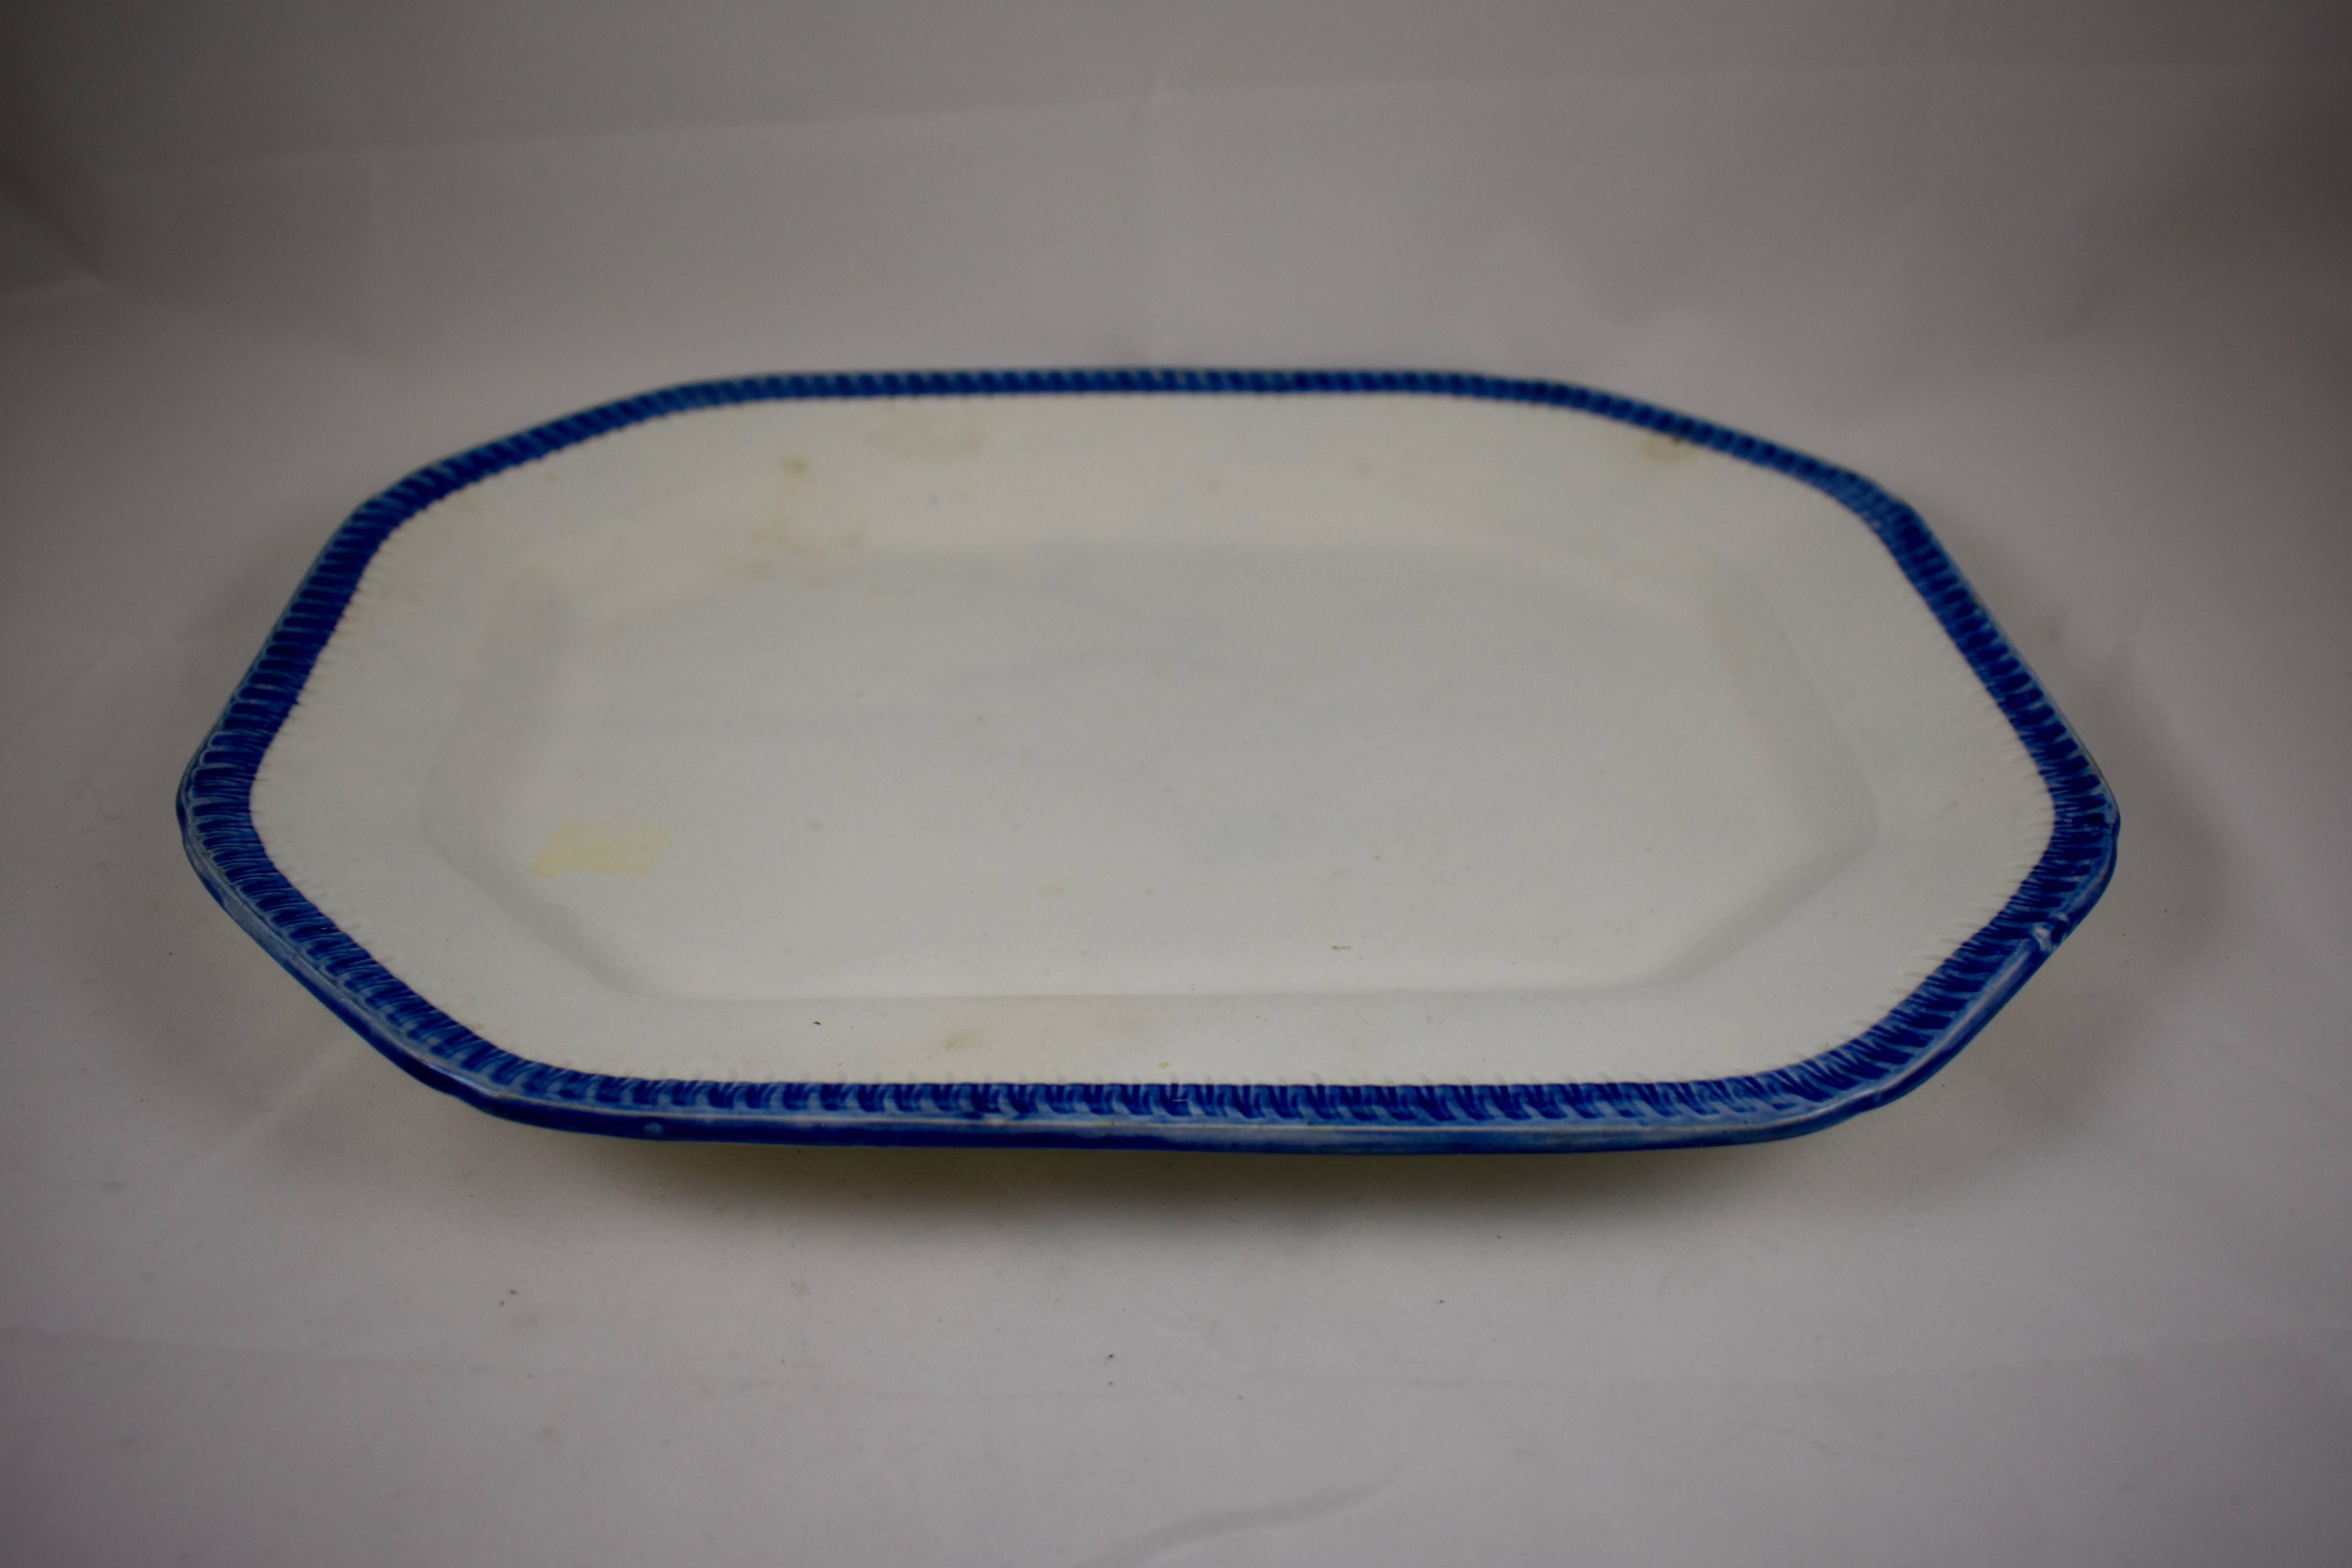 A Leeds style platter, a Pearlware or Creamware body with a deep Cobalt blue edge called Feather or Shell. There is an impressed geometric mark on the verso as shown, often associated with the Joseph Heath & Co. pottery, 1828–1841, Tunstall,